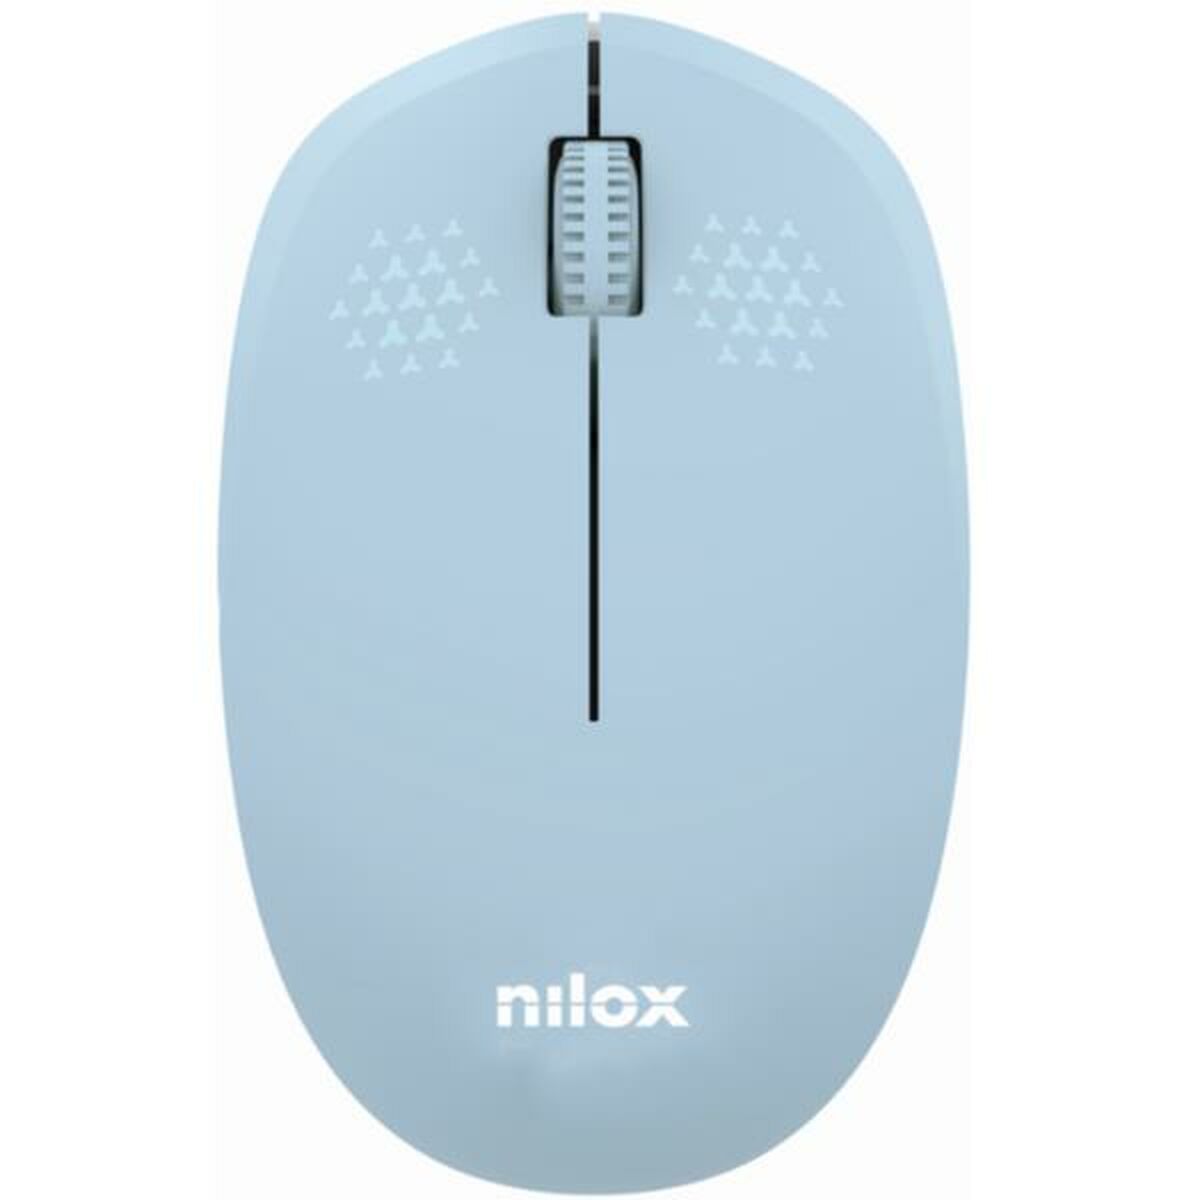 Mouse Nilox NXMOWI4012 Blue, Nilox, Computing, Accessories, mouse-nilox-nxmowi4012-blue, Brand_Nilox, category-reference-2609, category-reference-2642, category-reference-2656, category-reference-t-19685, category-reference-t-19908, category-reference-t-21353, category-reference-t-25626, computers / peripherals, Condition_NEW, office, Price_20 - 50, Teleworking, RiotNook